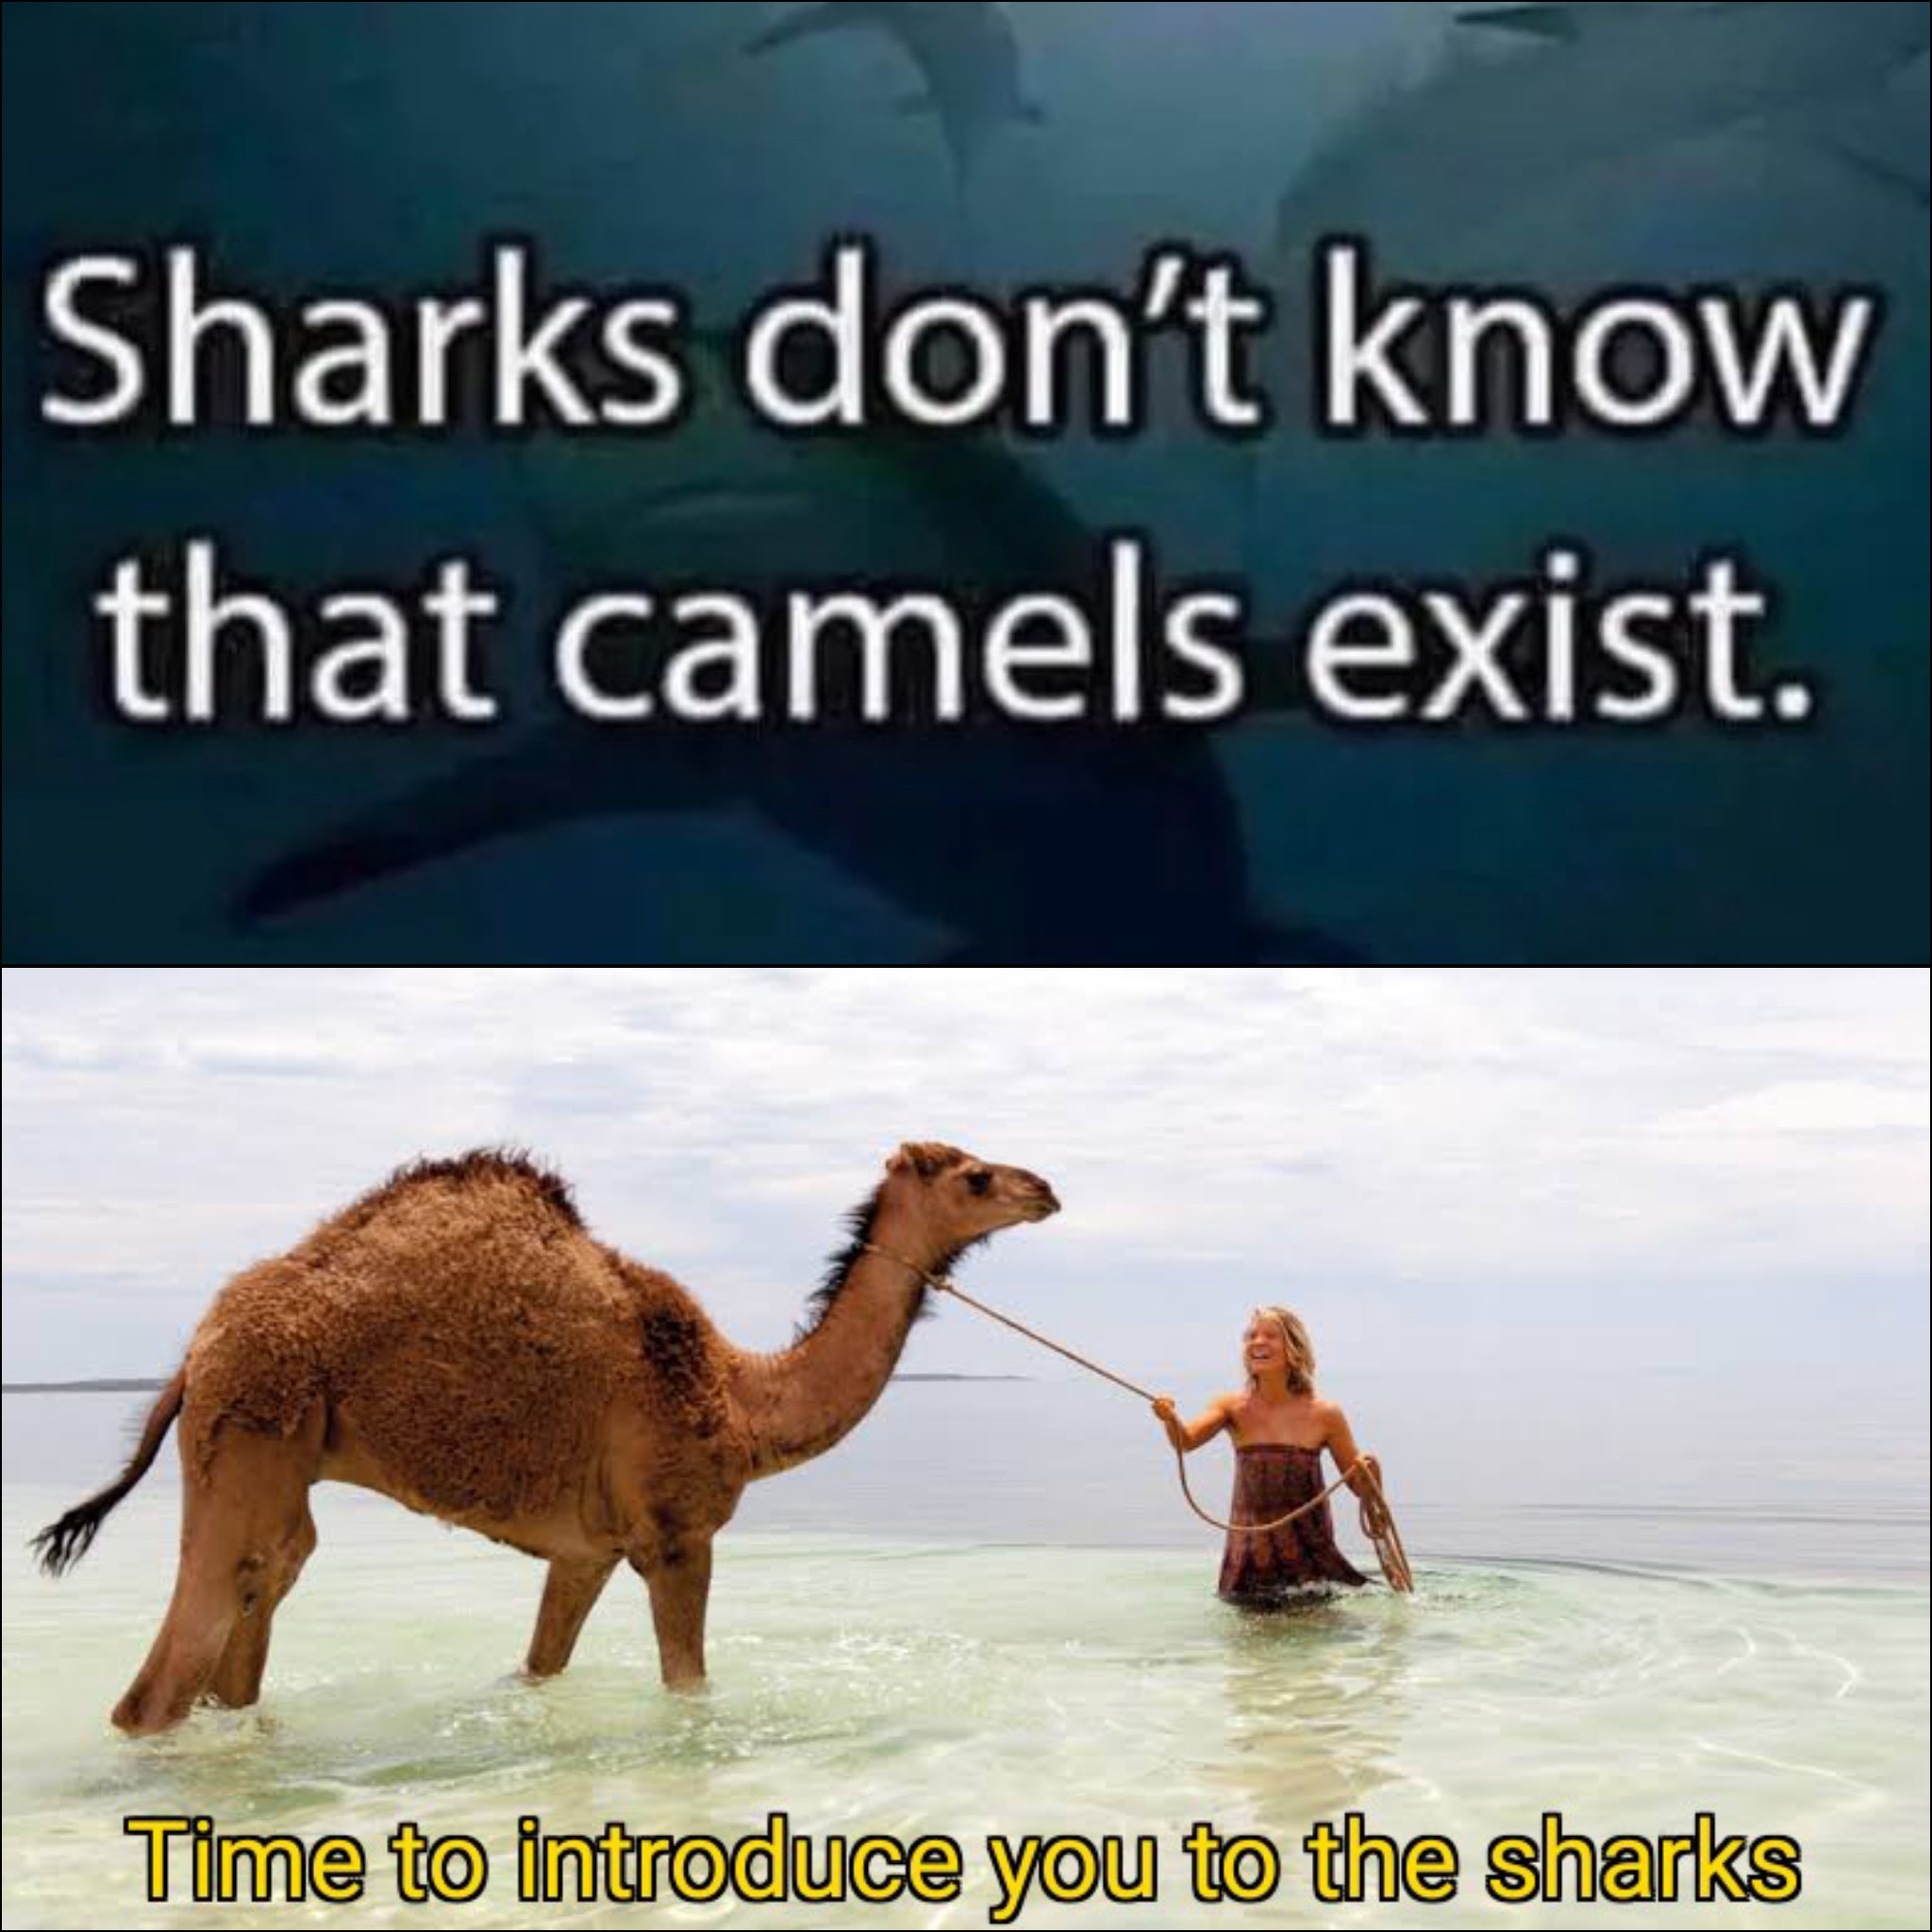 fauna - Sharks don't know that camels exist. Time to introduce you to the sharks